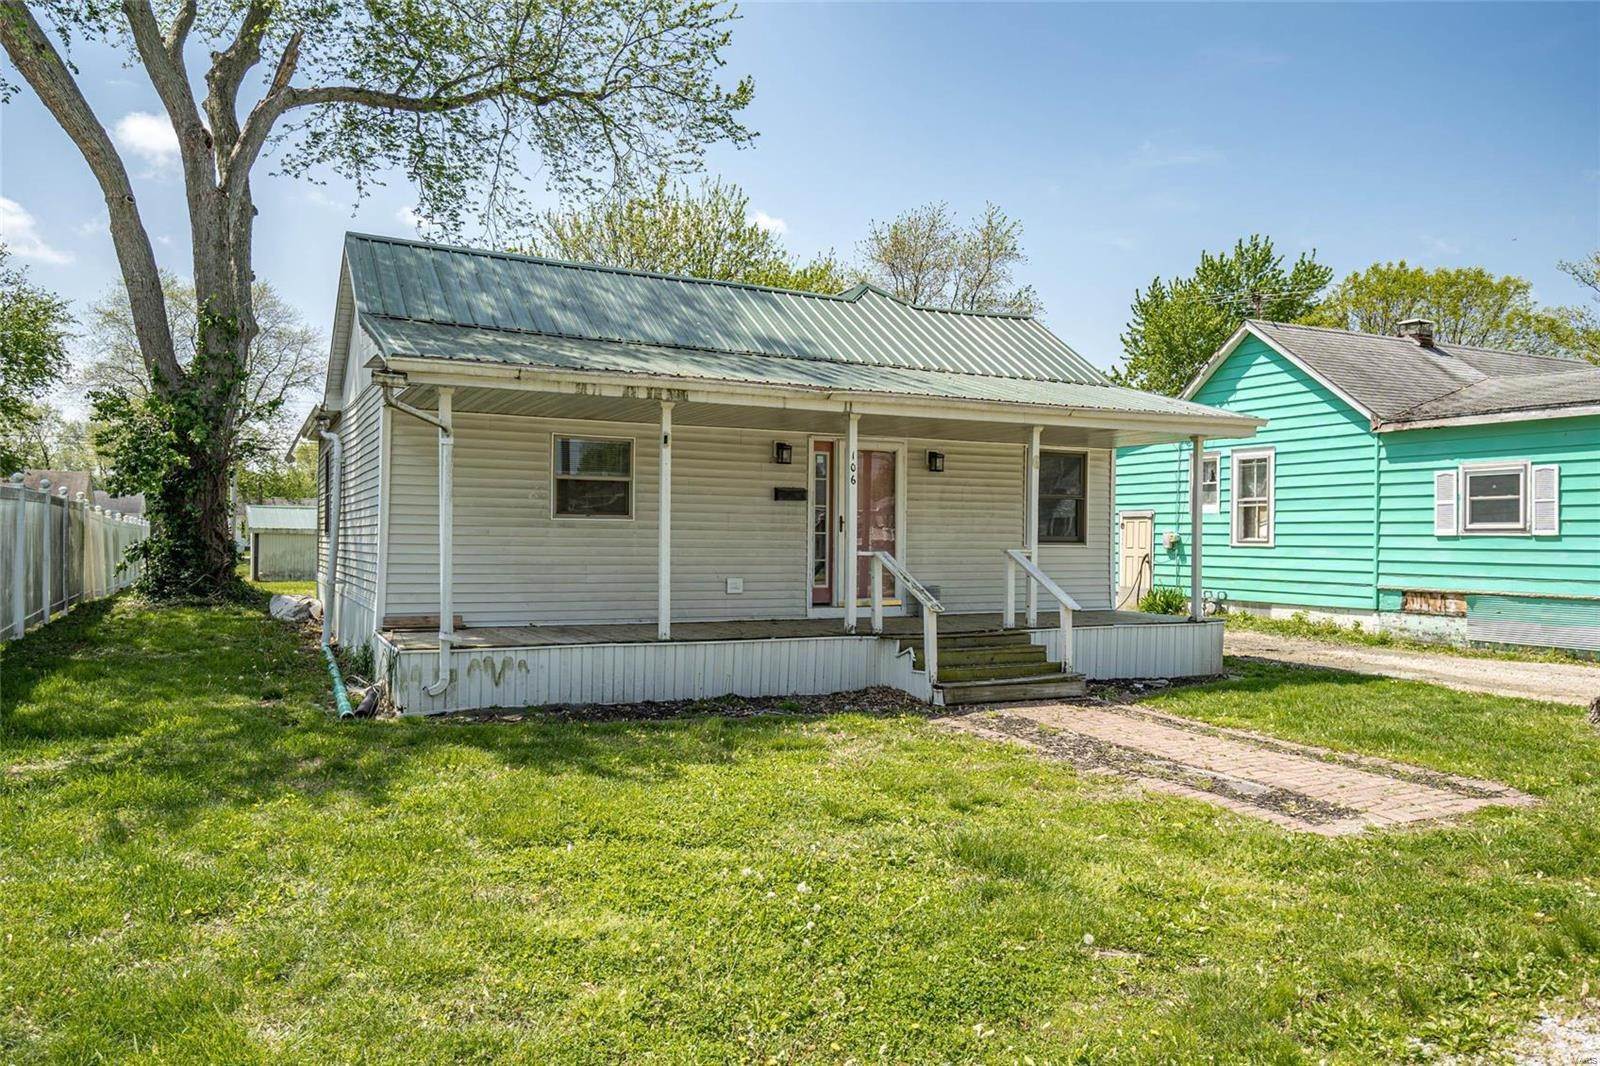 16. Single Family Homes for Sale at 106 W 4th Street Mount Olive, Illinois 62069 United States